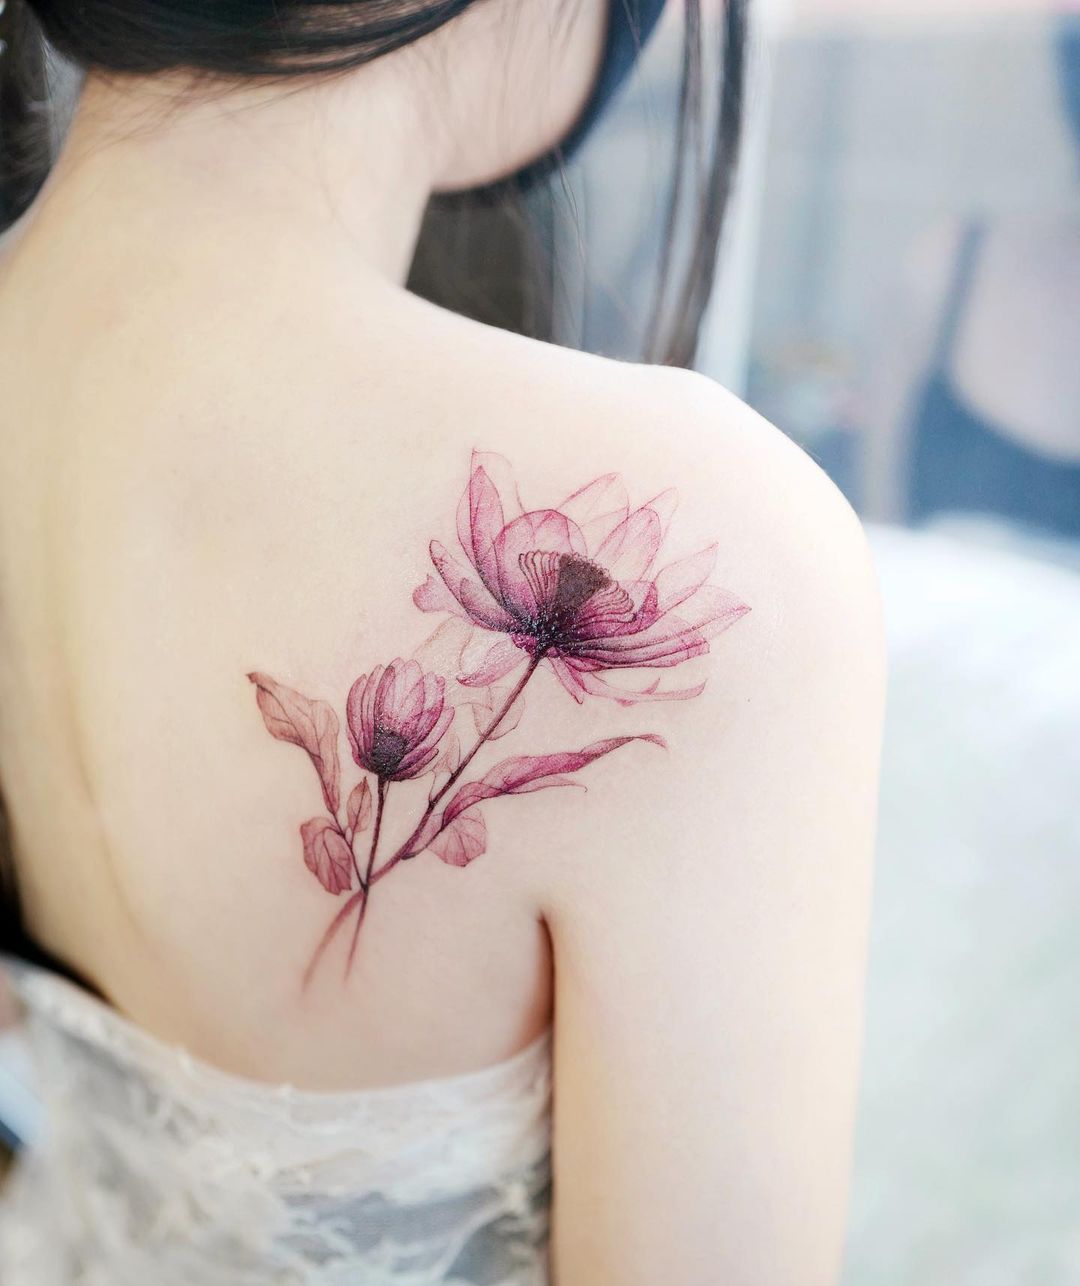 Iris Flower Tattoos Meanings  Designs to Accessorize  TattoosWin